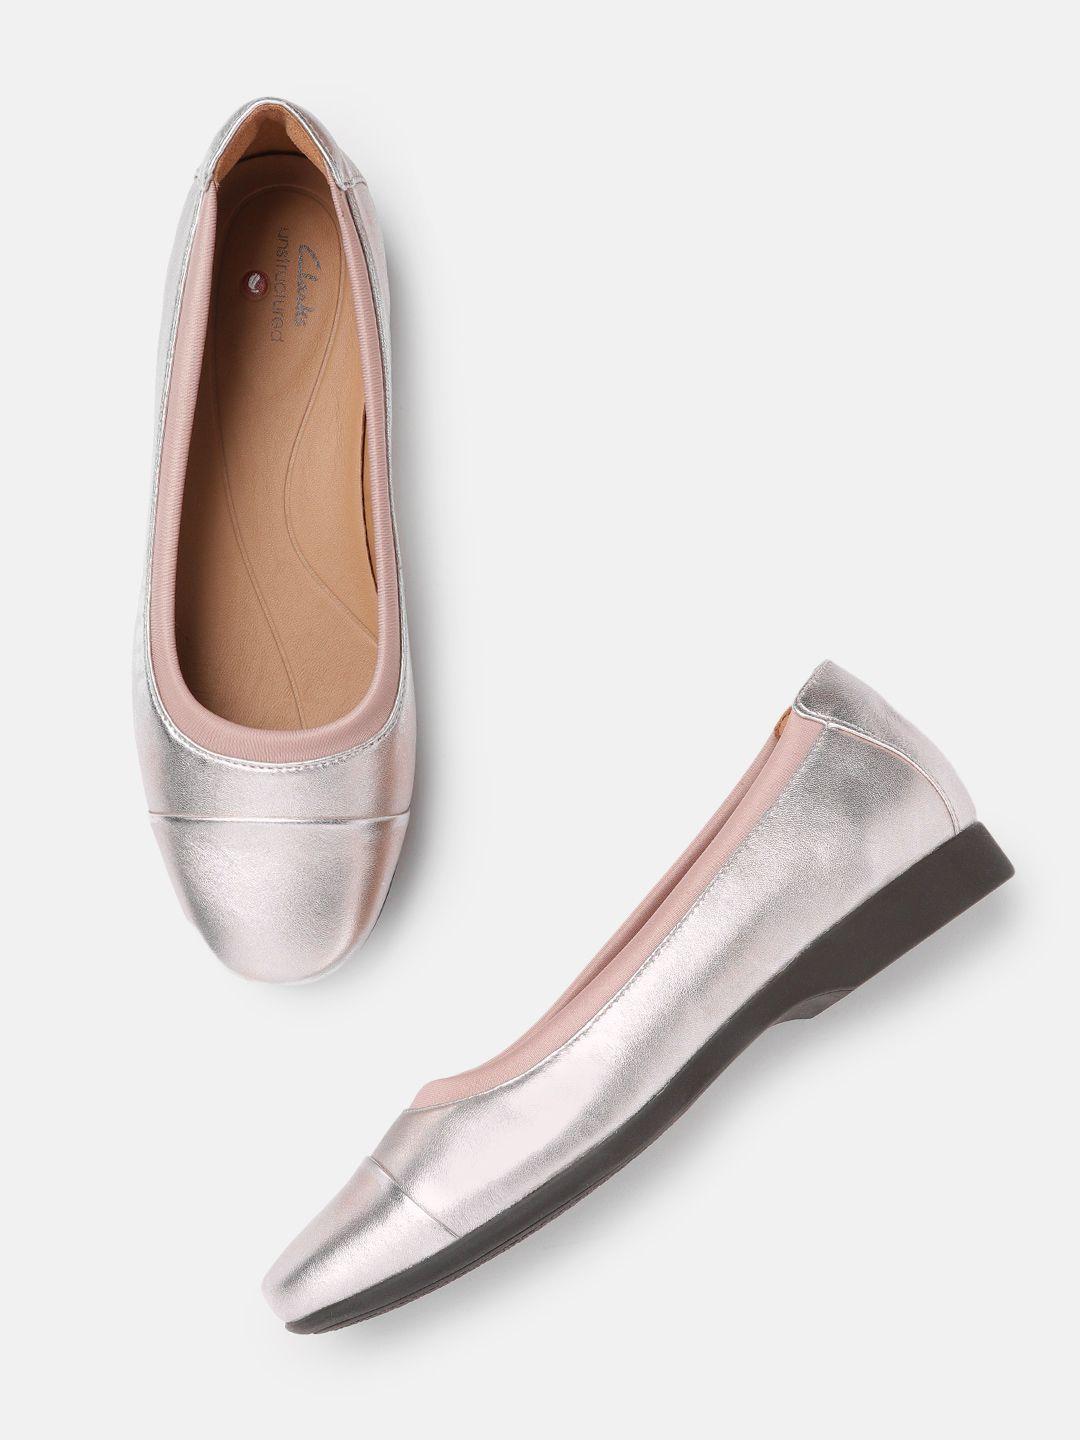 clarks-women-muted-rose-gold-toned-solid-glossy-finish-ballerinas